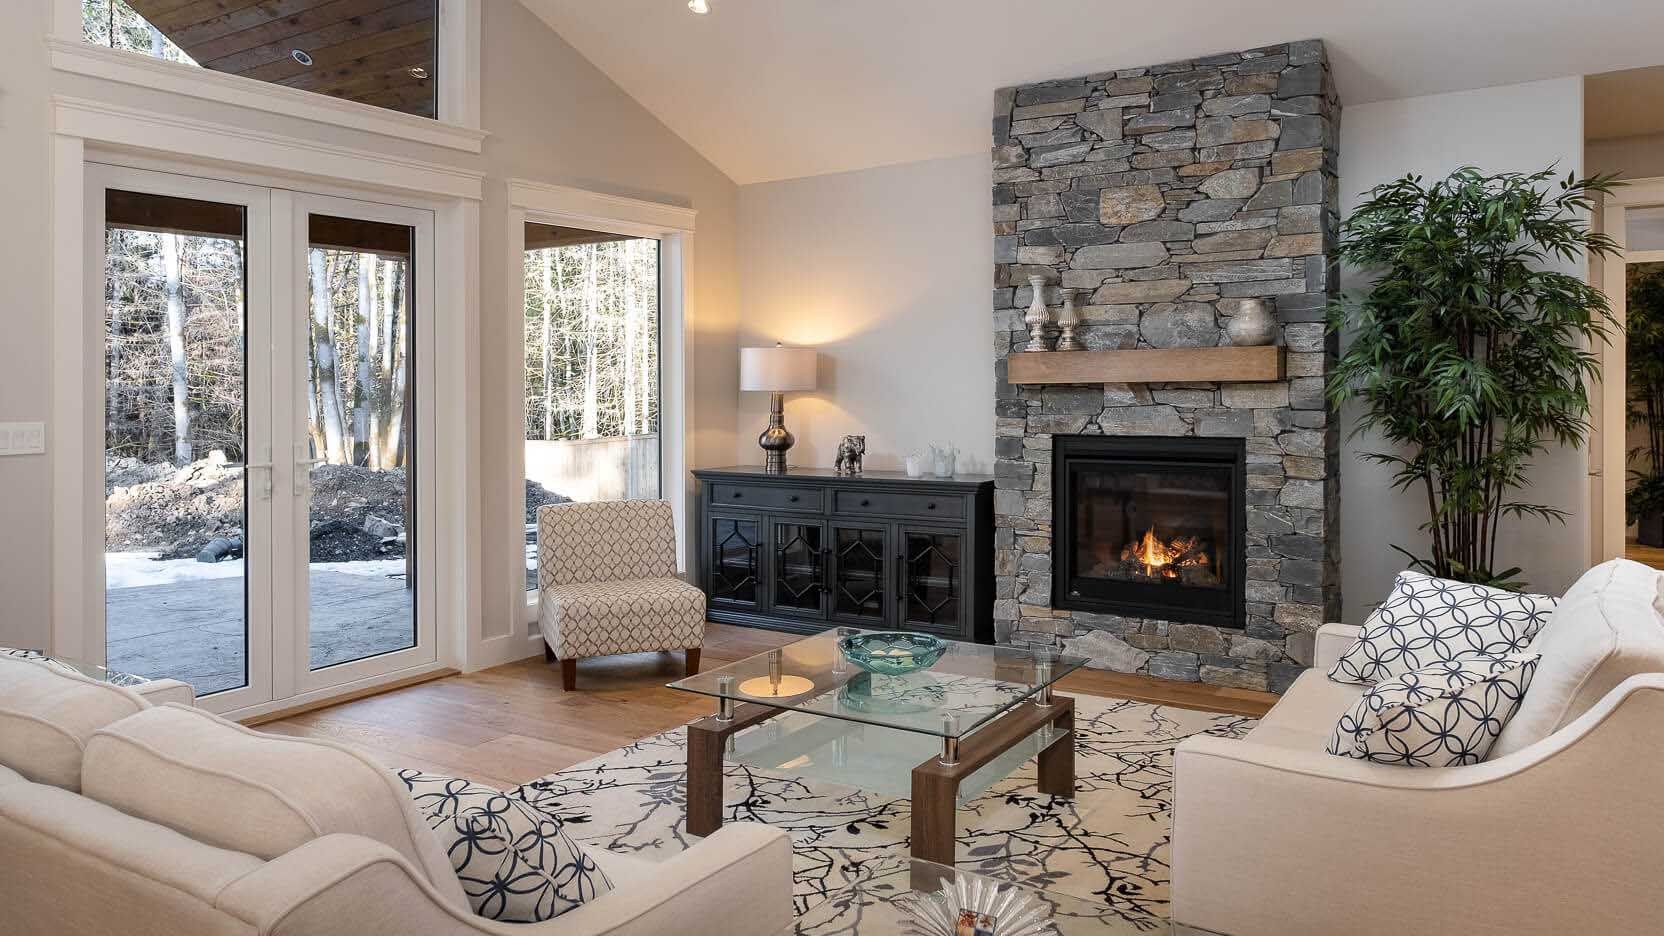 A beautiful family room with a show-stopping fireplace, high ceilings, and an inviting atmosphere. Designed by Ballard Fine Homes.